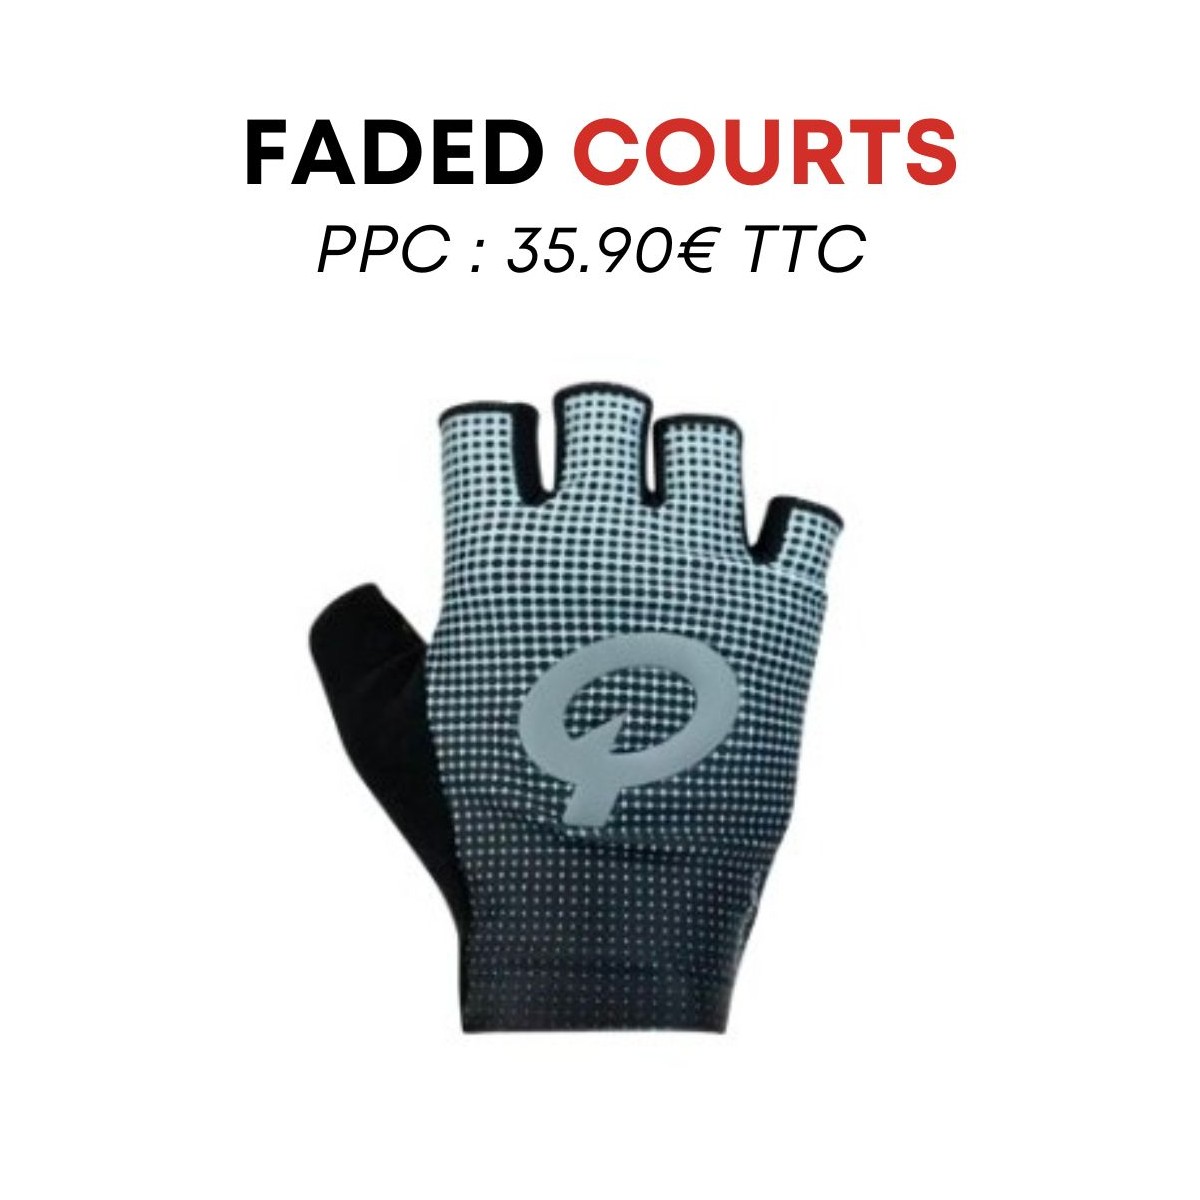 Gants Courts - FADED